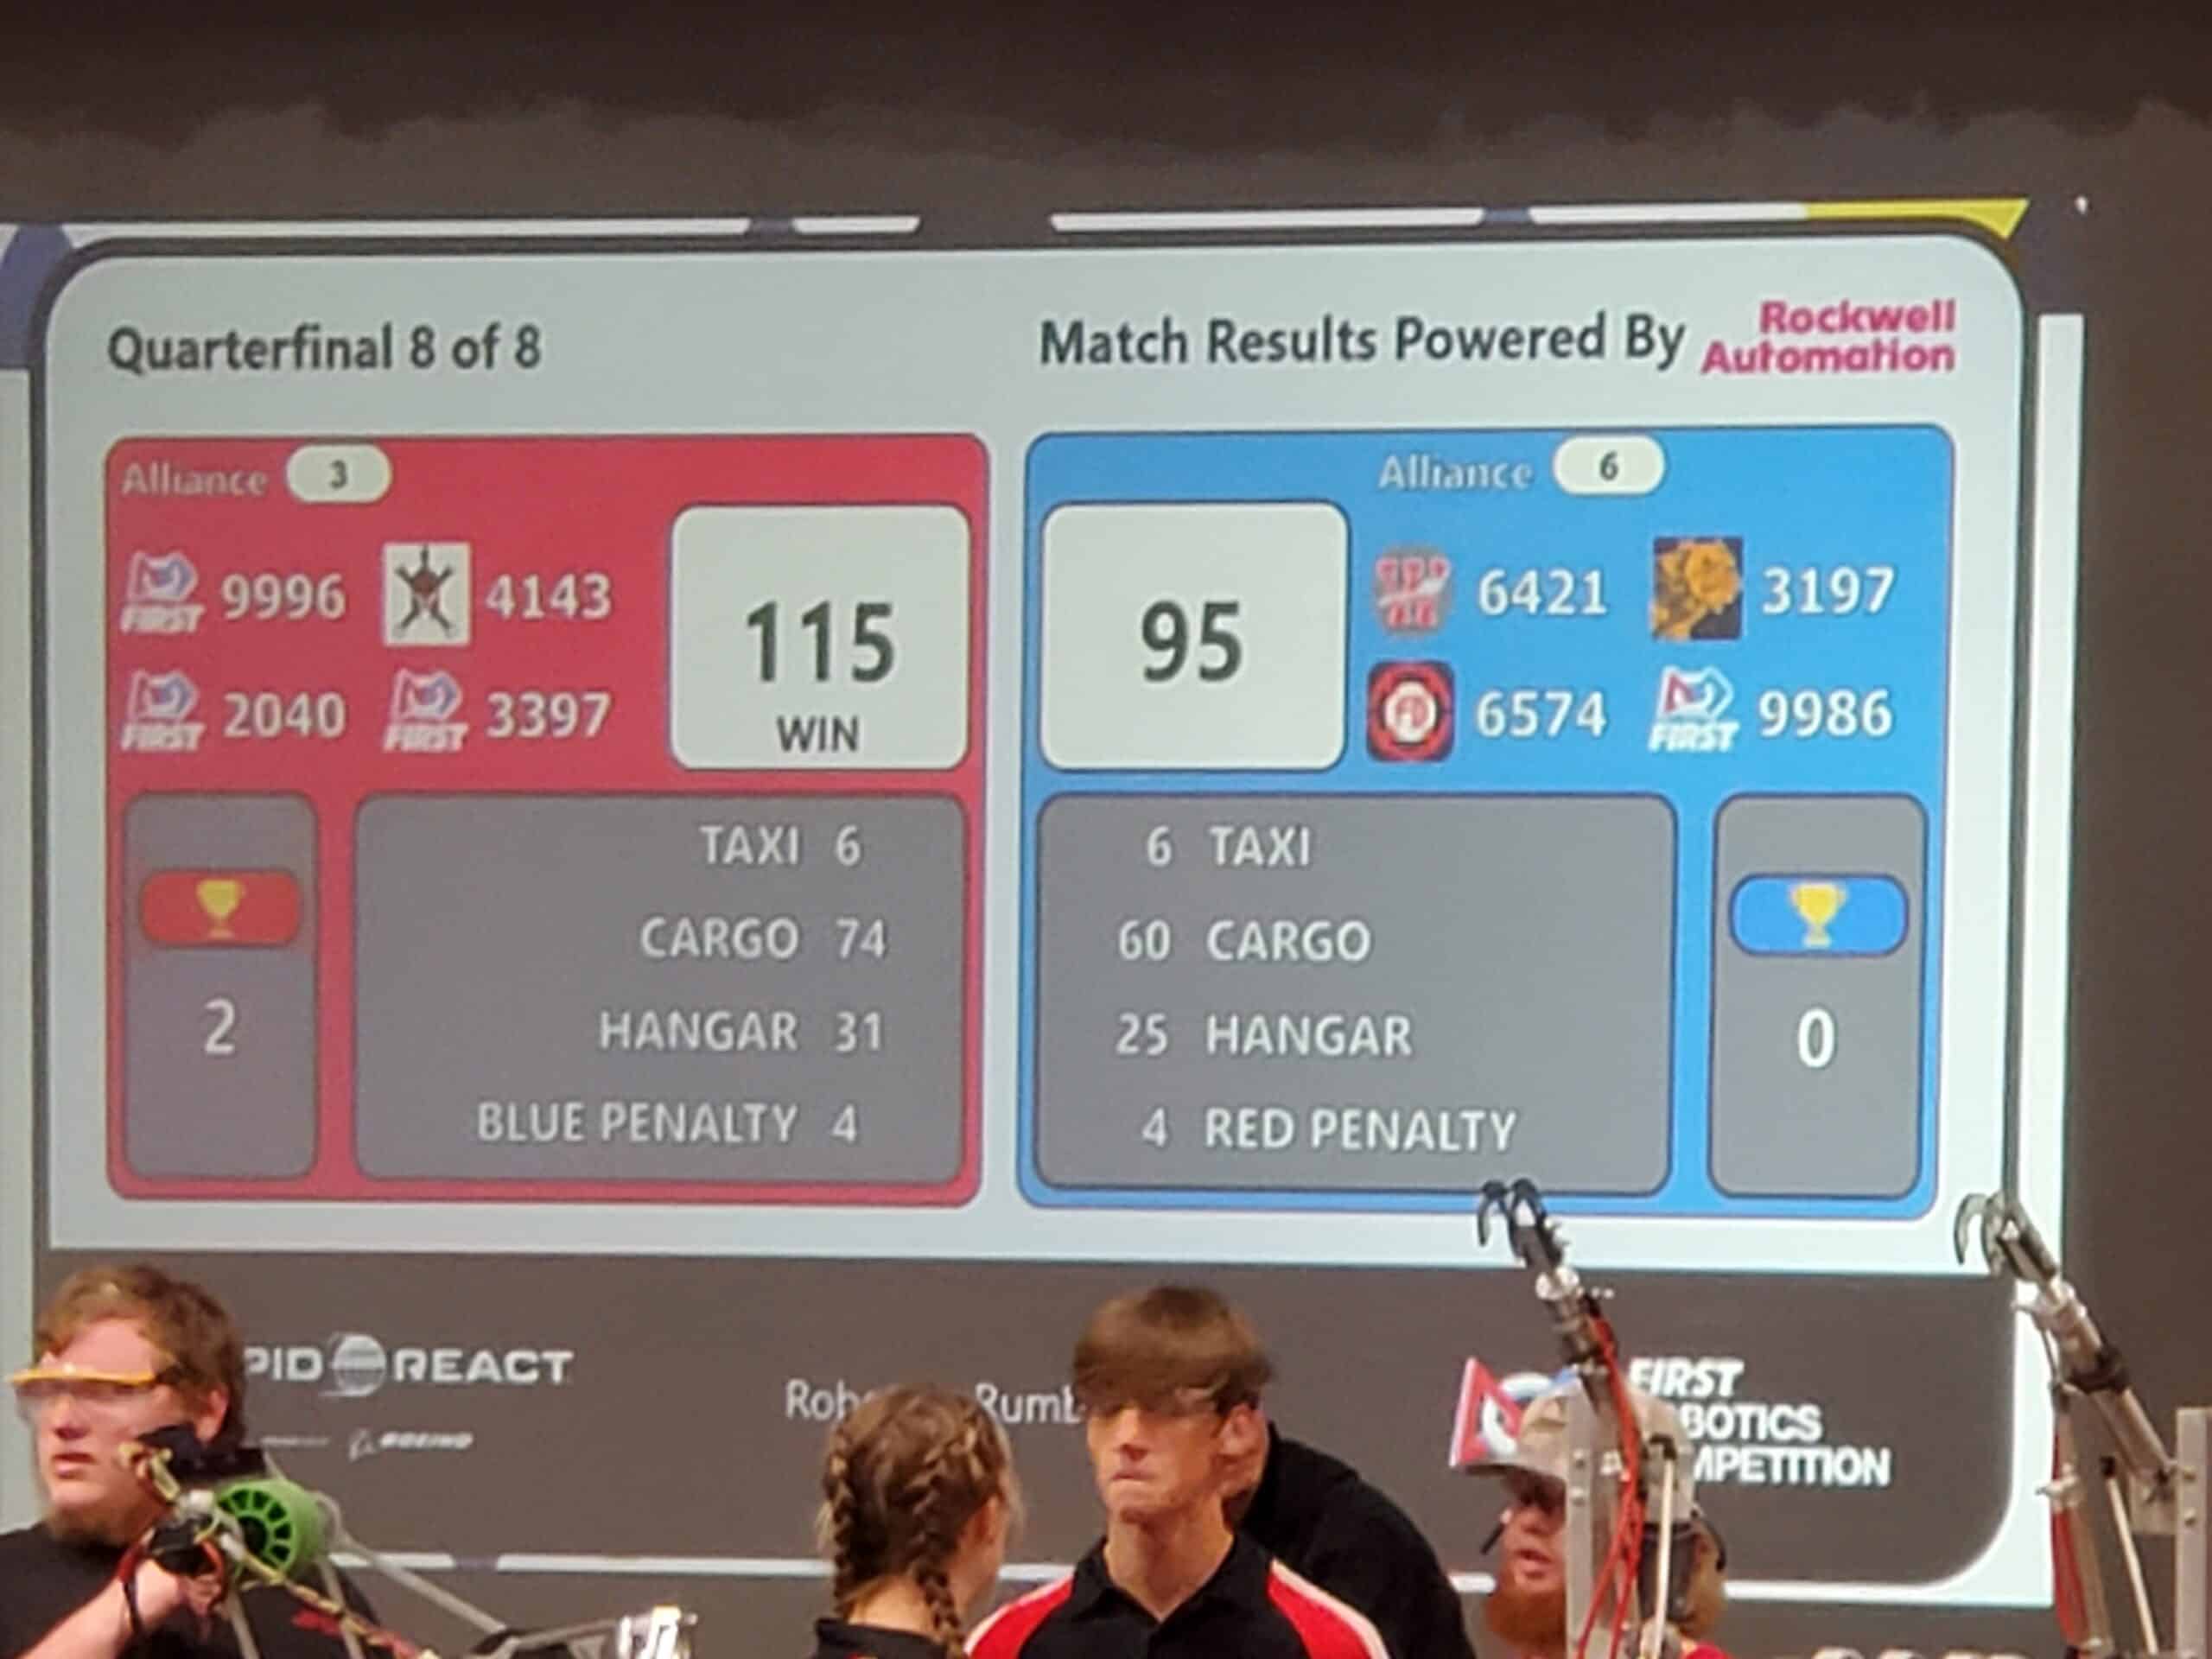 The Final Score in our Last Elimination Match